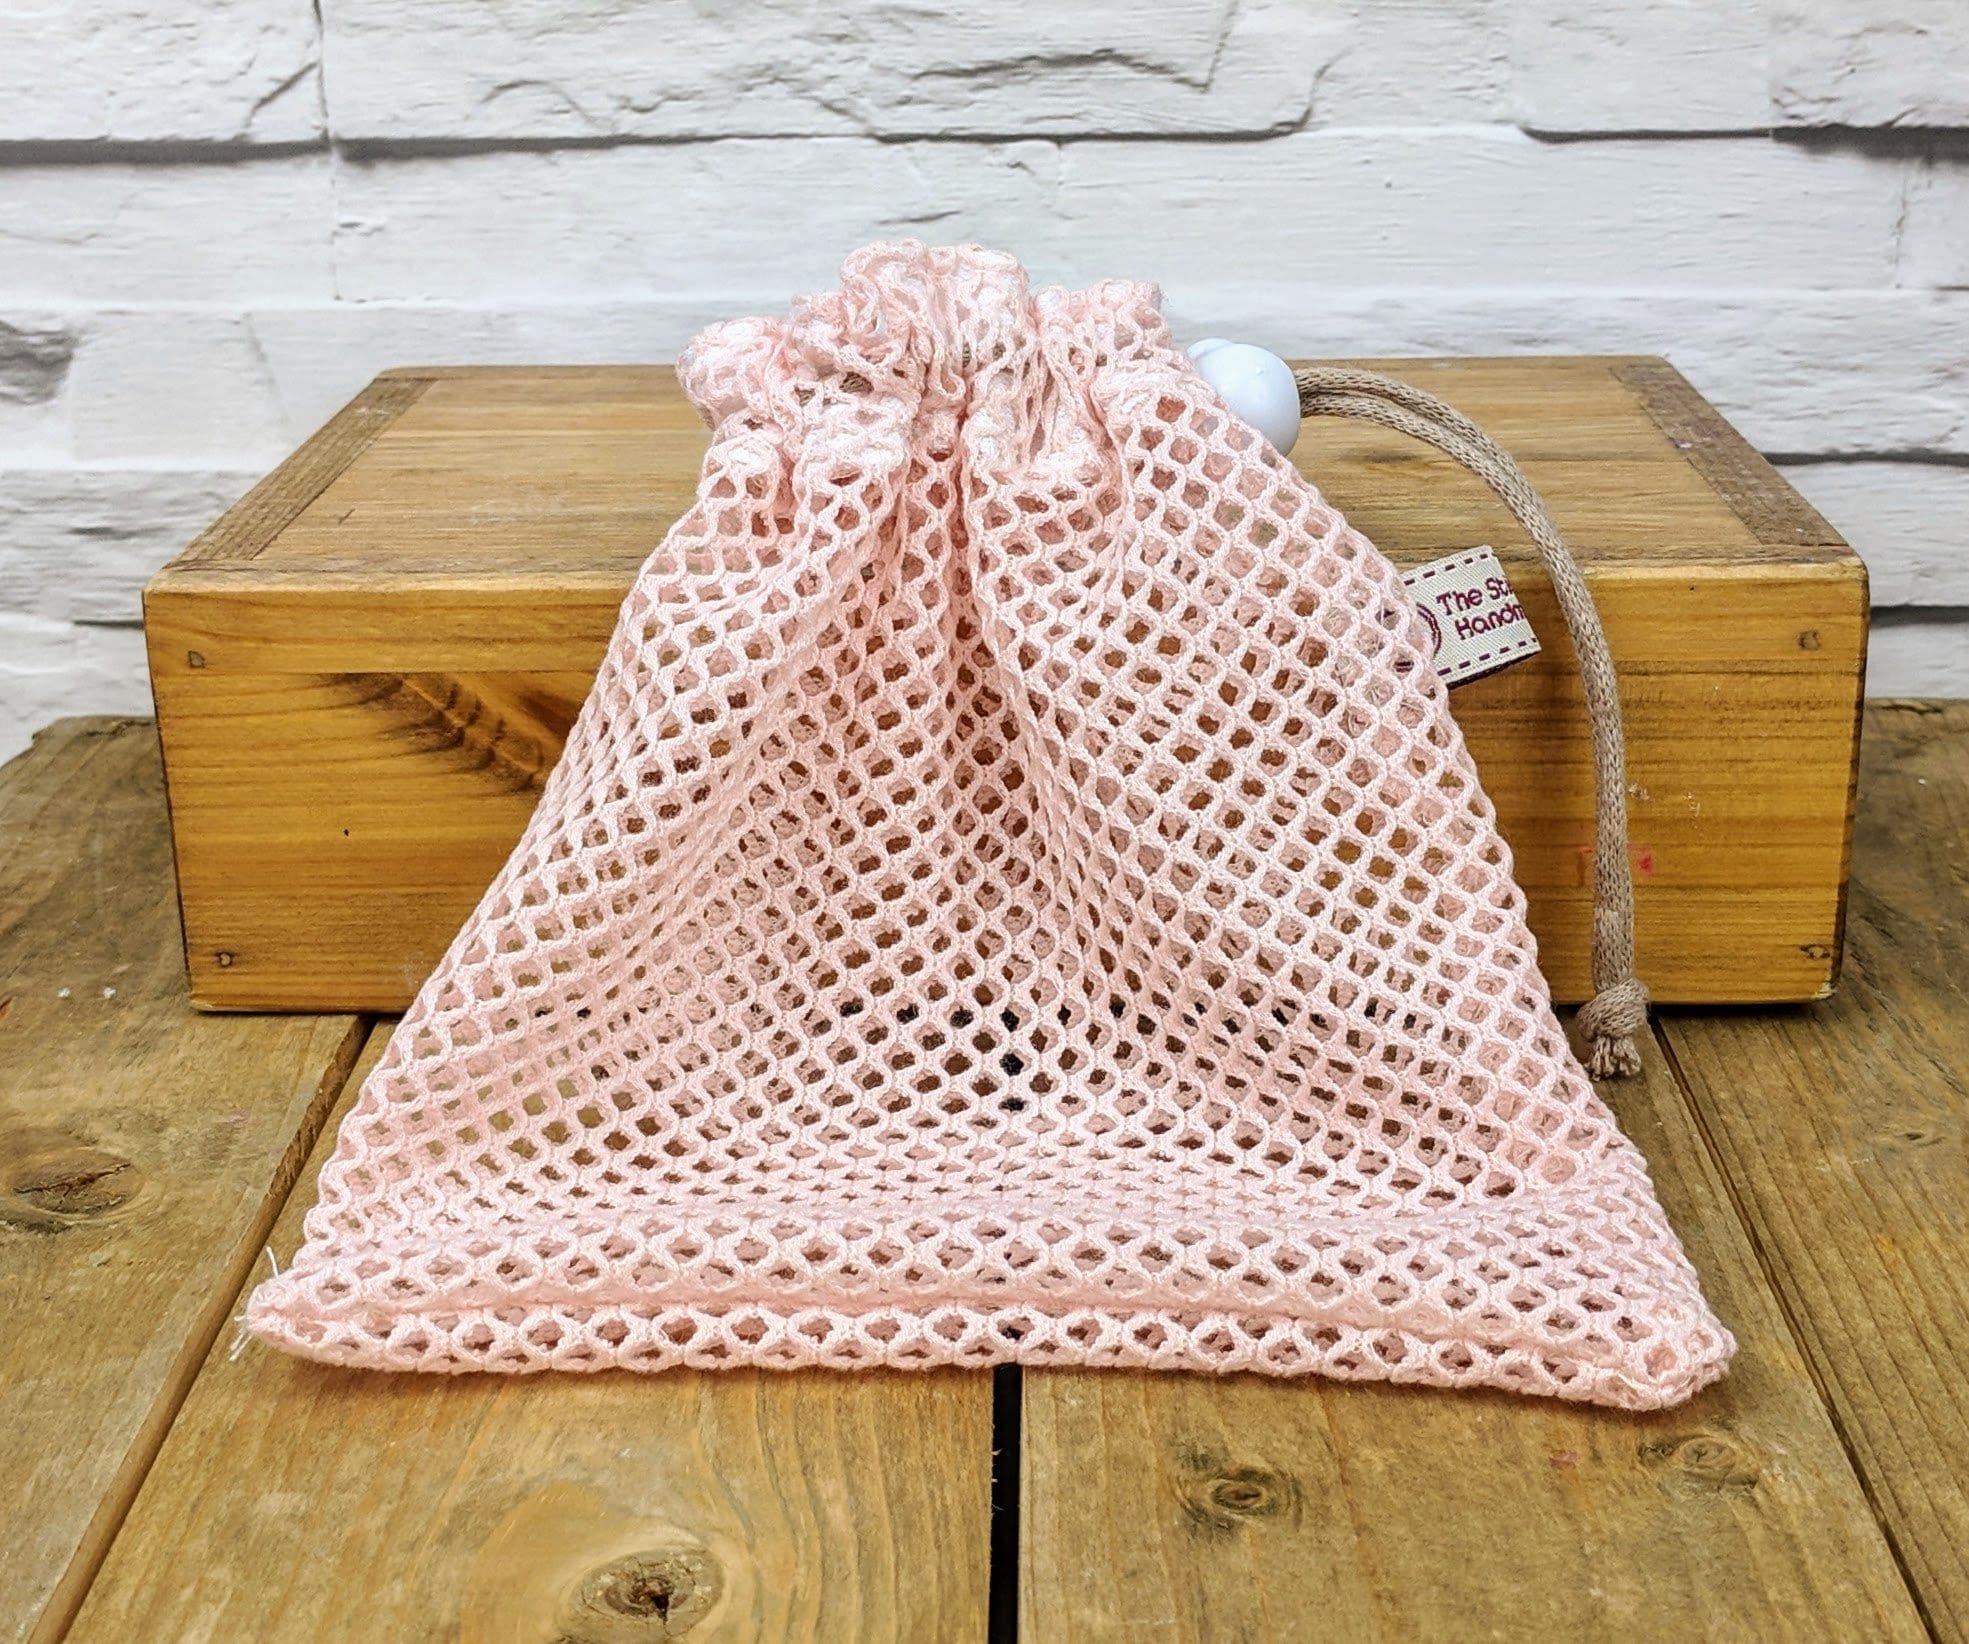 Reusable Small Mesh Wash /Laundry Bag in Pink or White